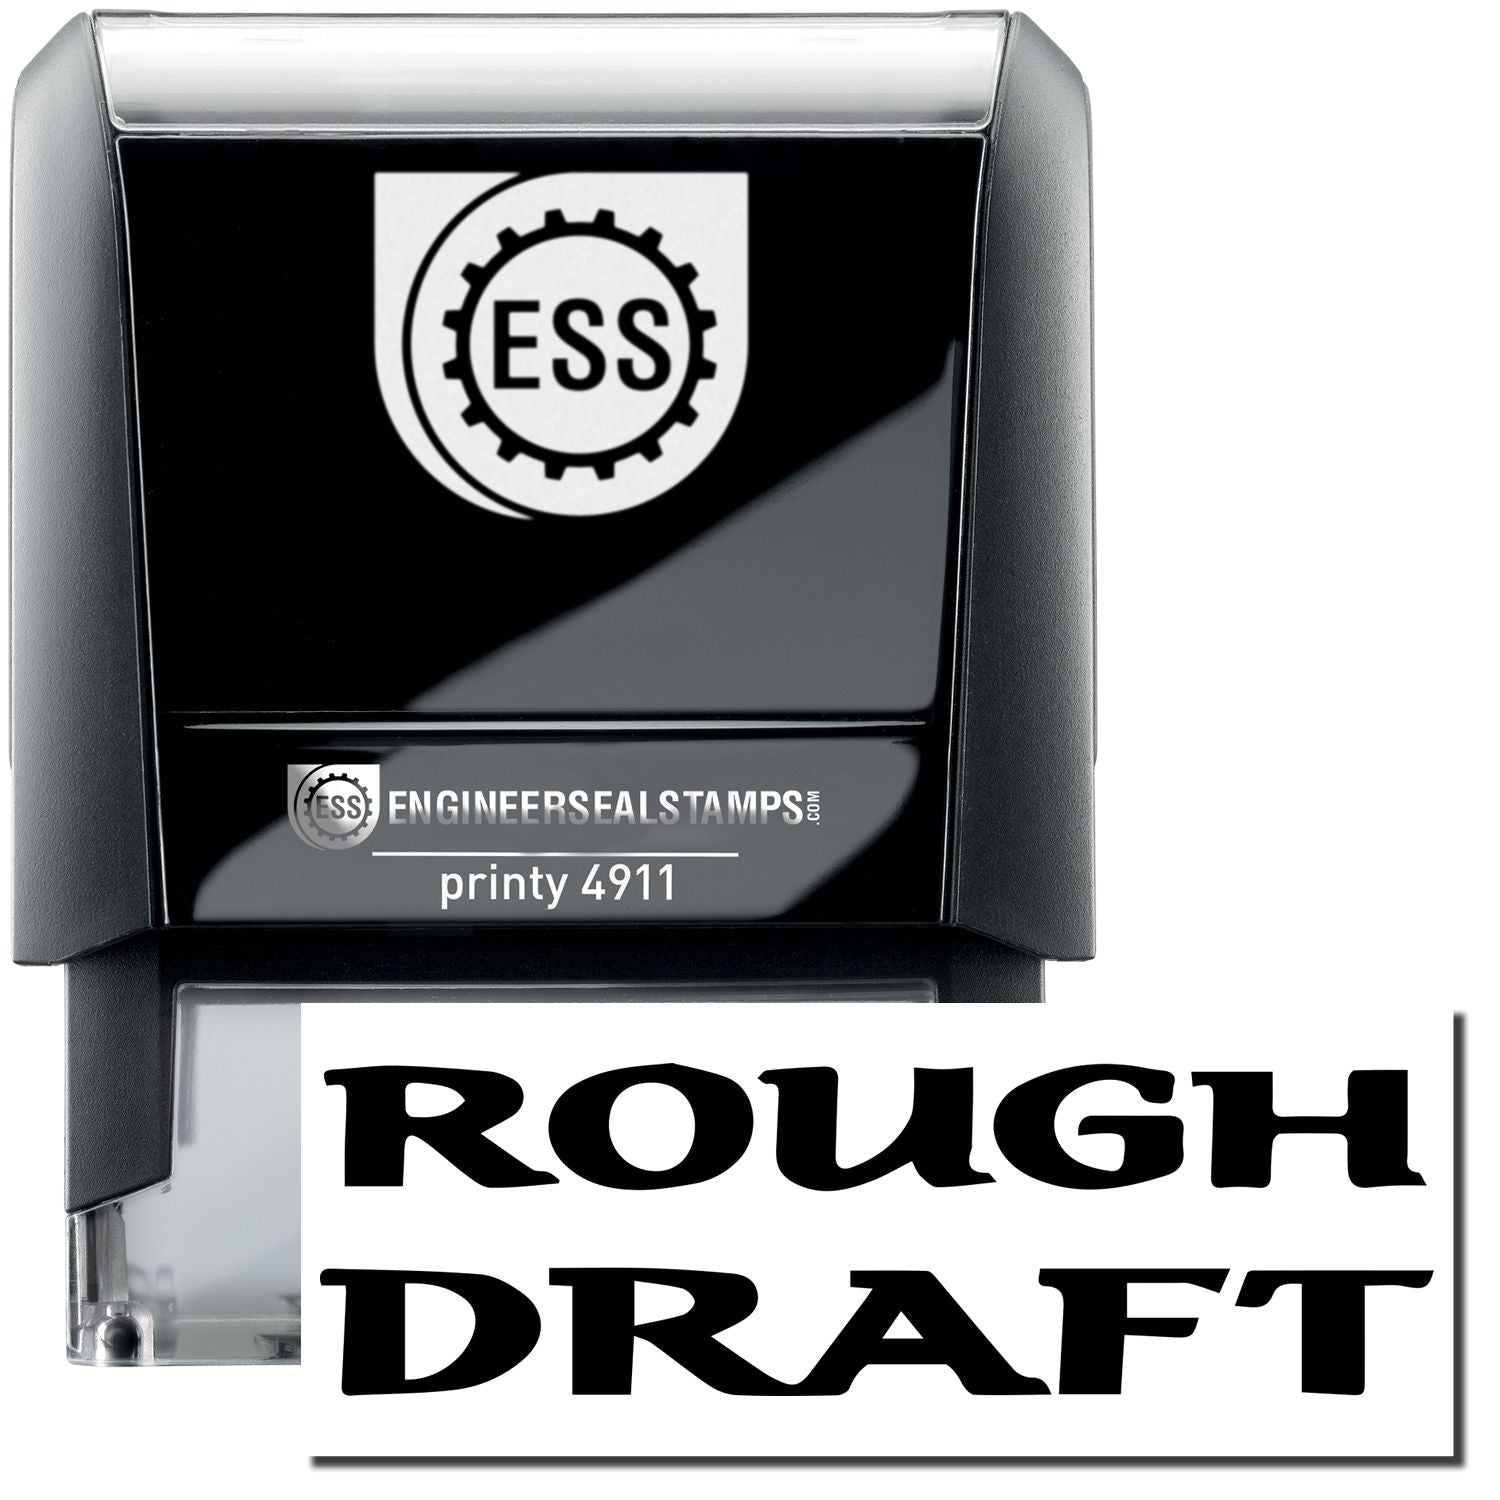 A self-inking stamp with a stamped image showing how the text "ROUGH DRAFT" in bold font is displayed after stamping.